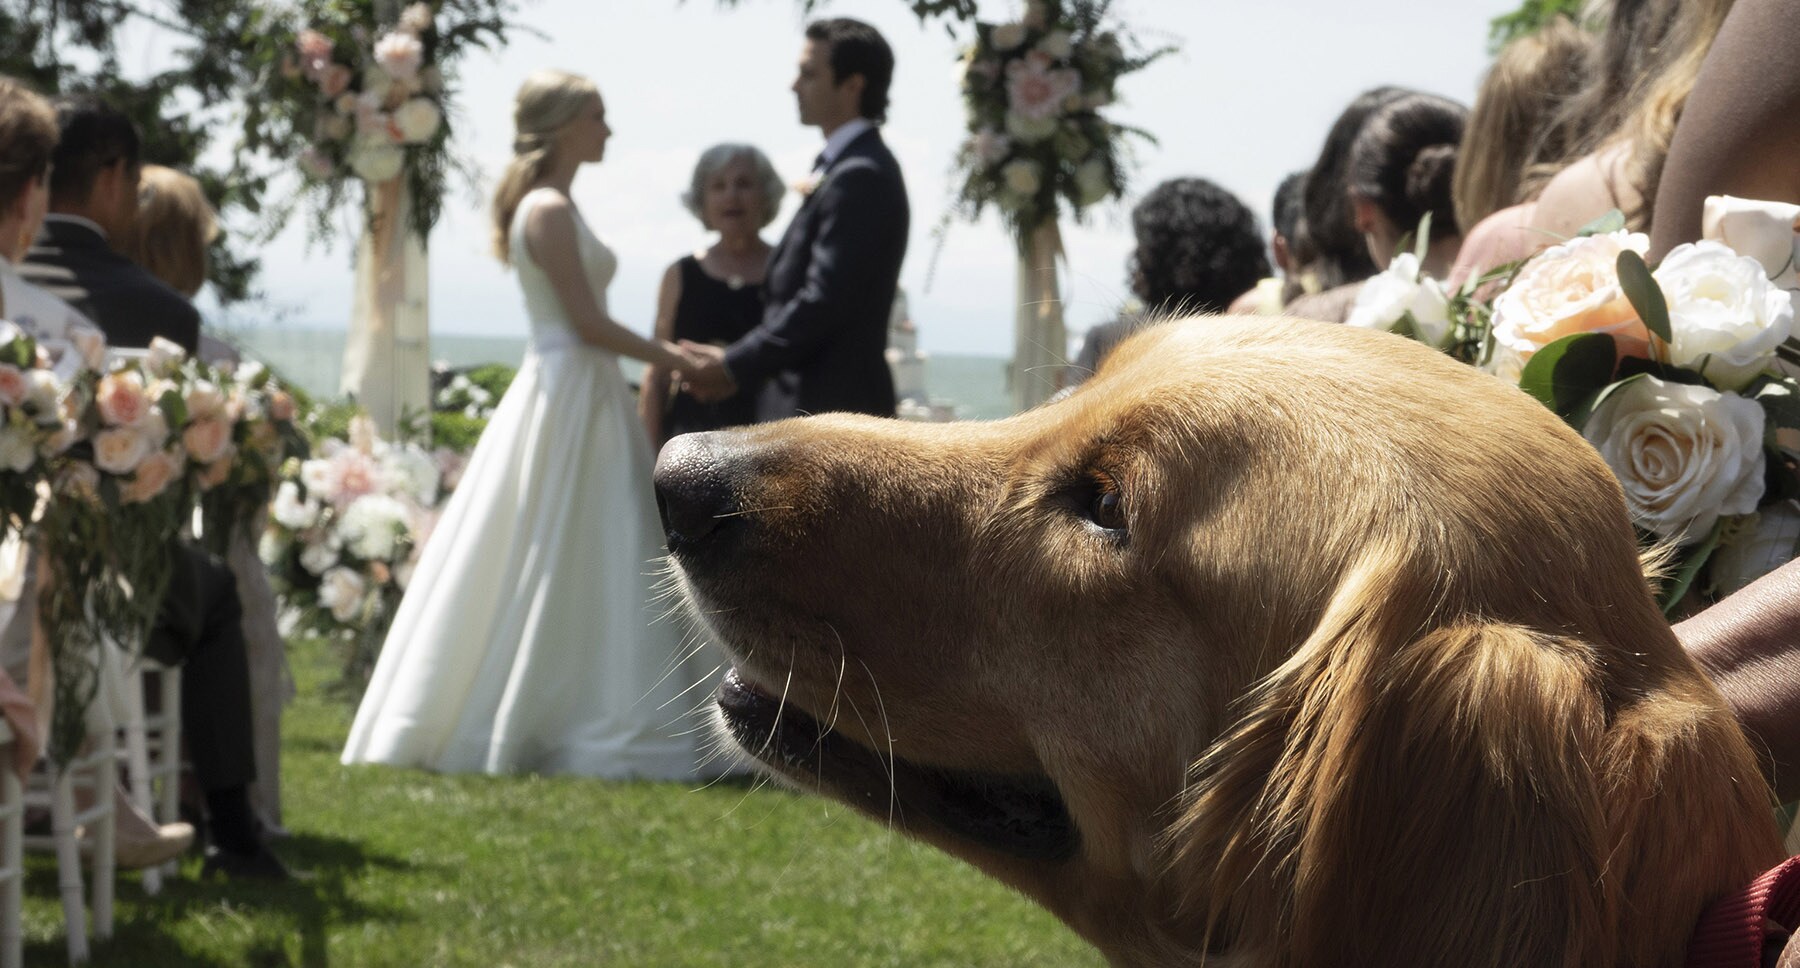 Dog Enzo at Denny (Milo Ventimiglia) and Eve's (Amanda Seyfried) wedding in the movie "The Art of Racing in the Rain"